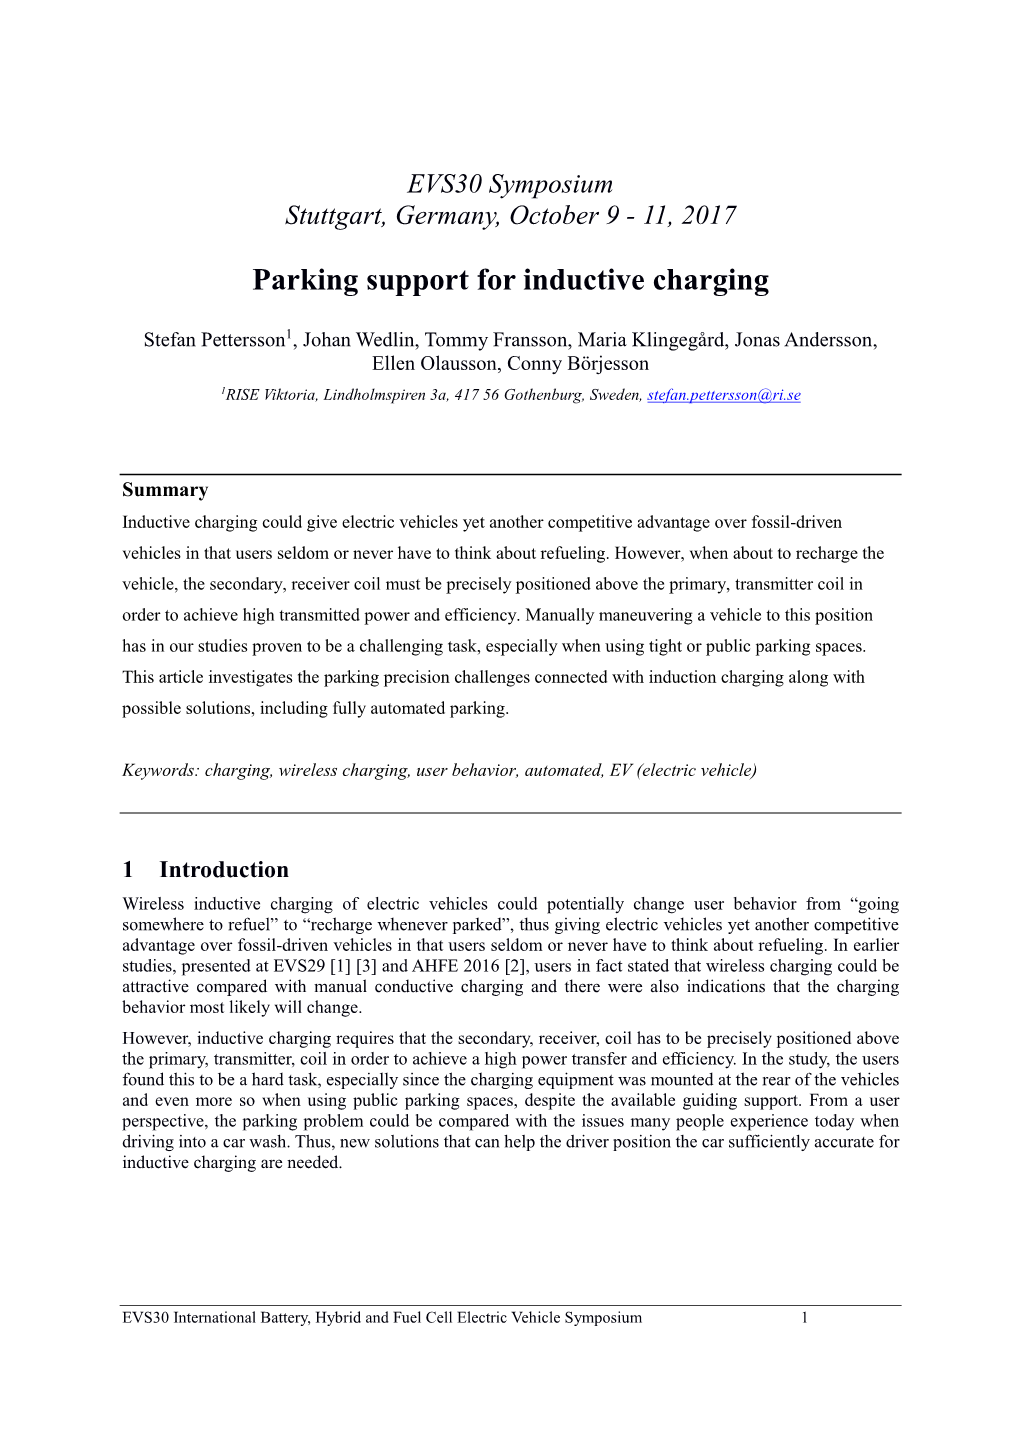 Parking Support for Inductive Charging